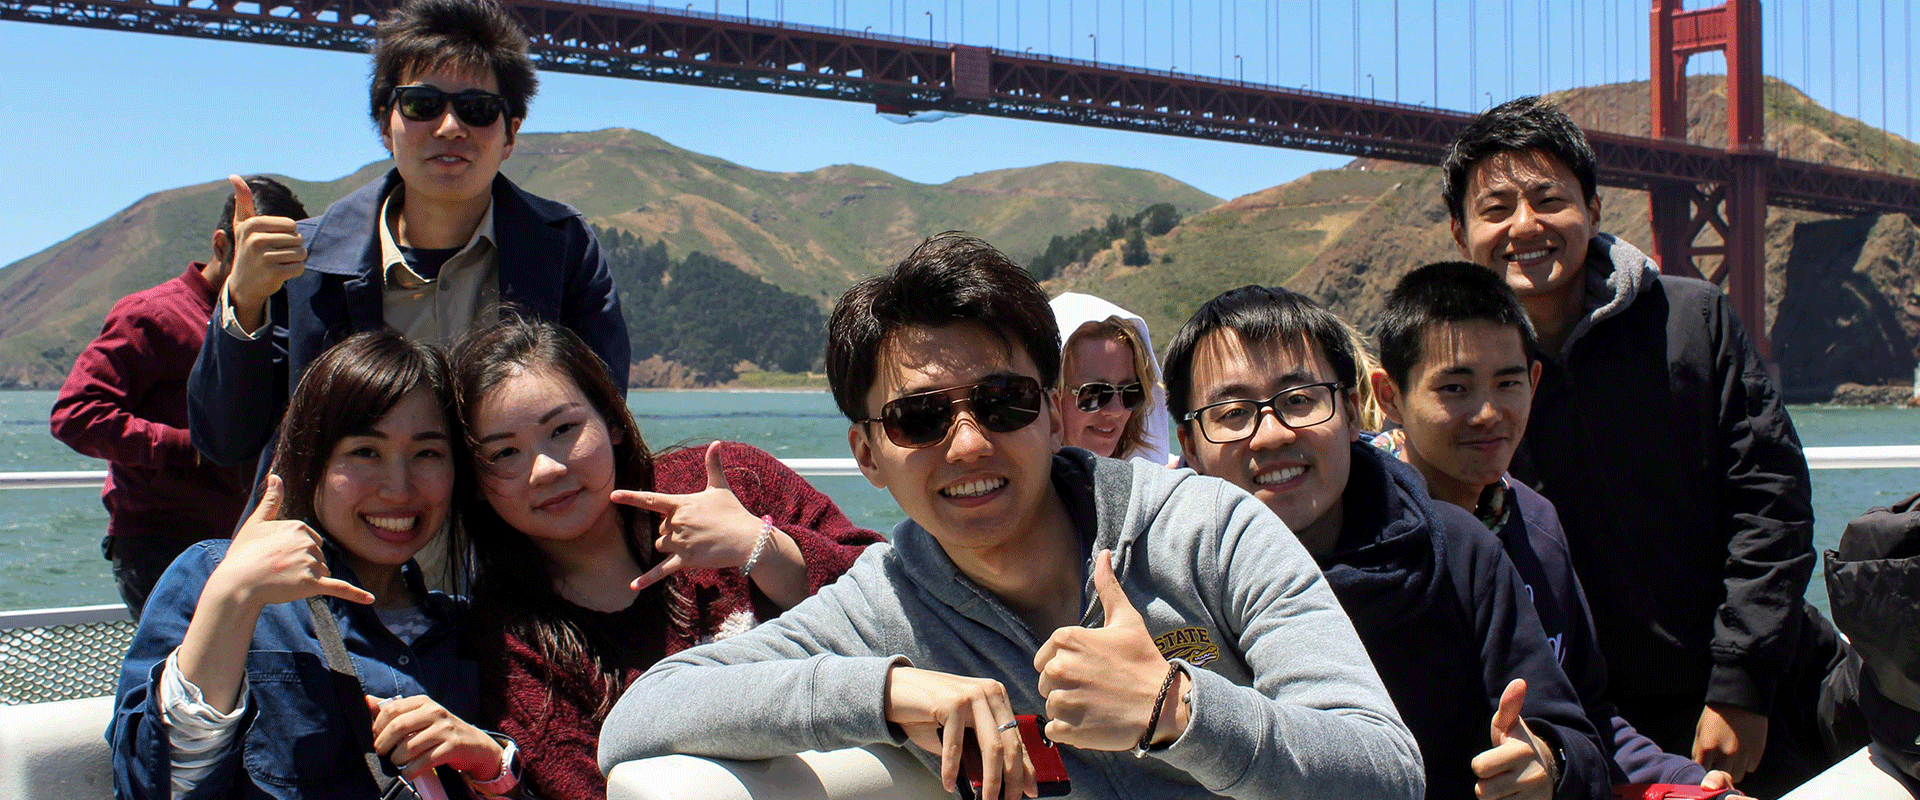 International students on a bay cruise with the Golden Gate Bridge behind them